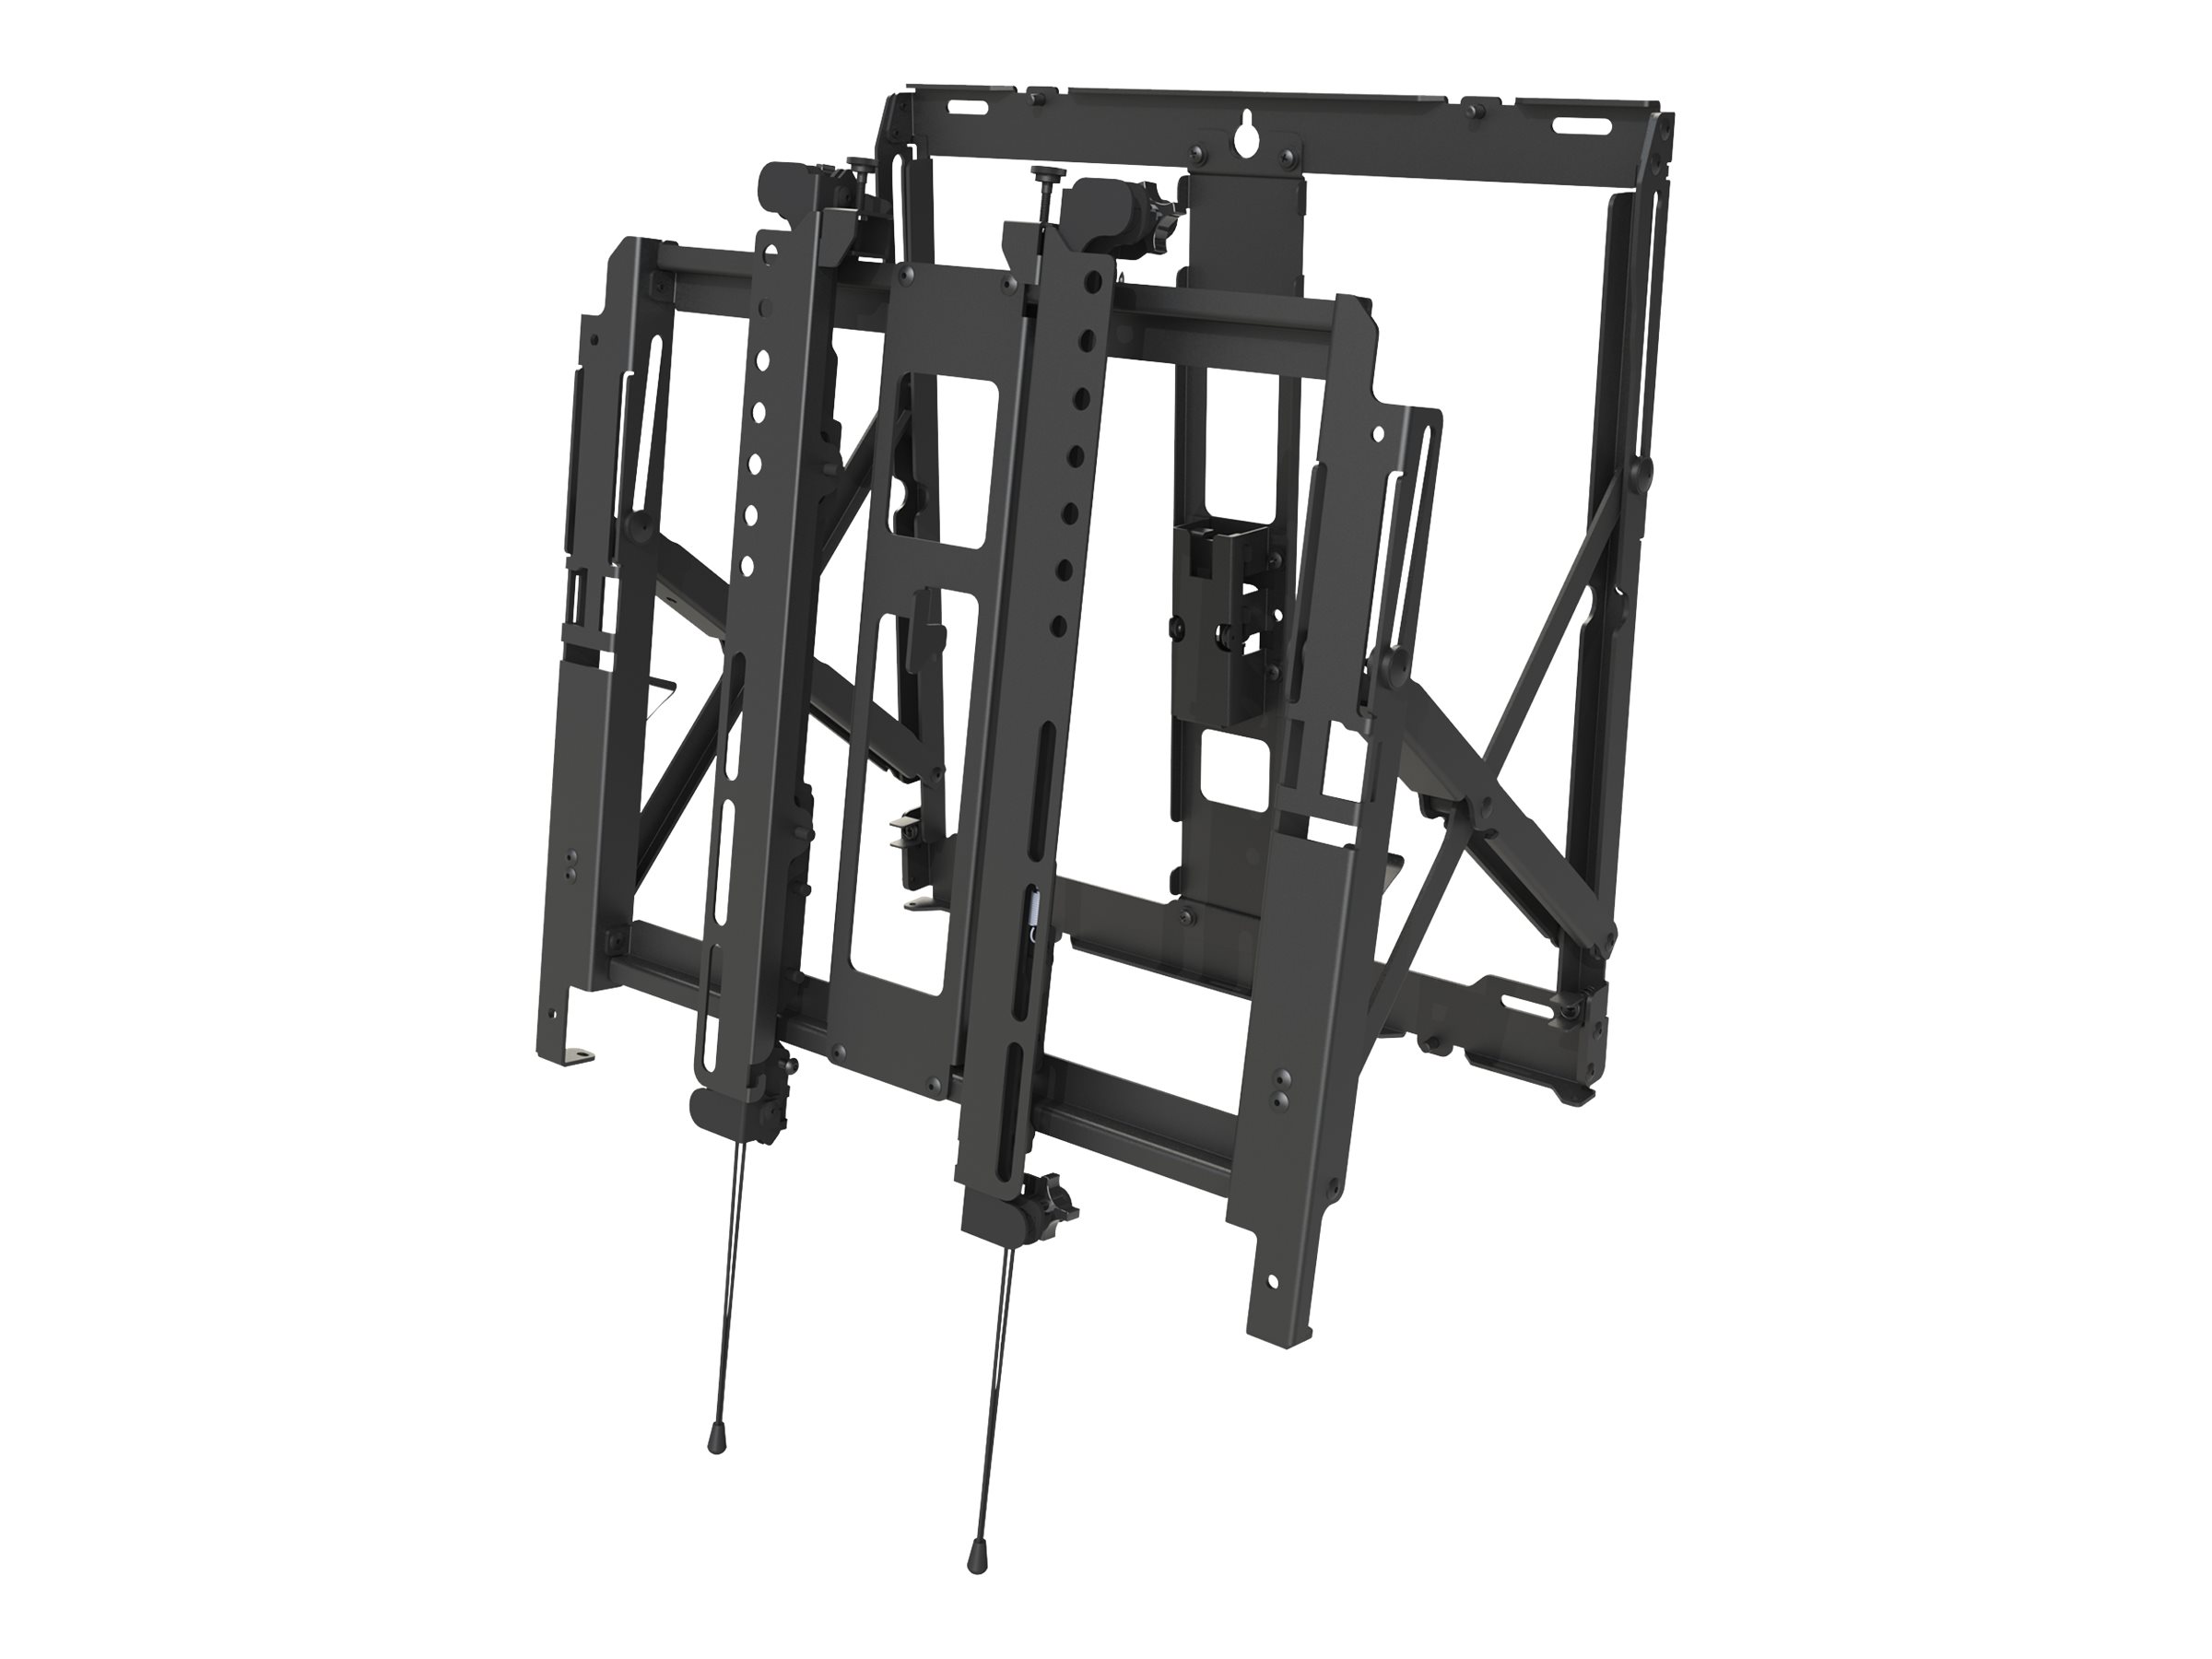 Peerless-AV SmartMount Full Service Video Wall Mount with Quick Release DS-VW755S - Mounting kit (wall mount) - for video wall - black powder coat - screen size: 40"-65" - mounting interface: 400 x 400 mm - wall-mountable - image 1 of 2